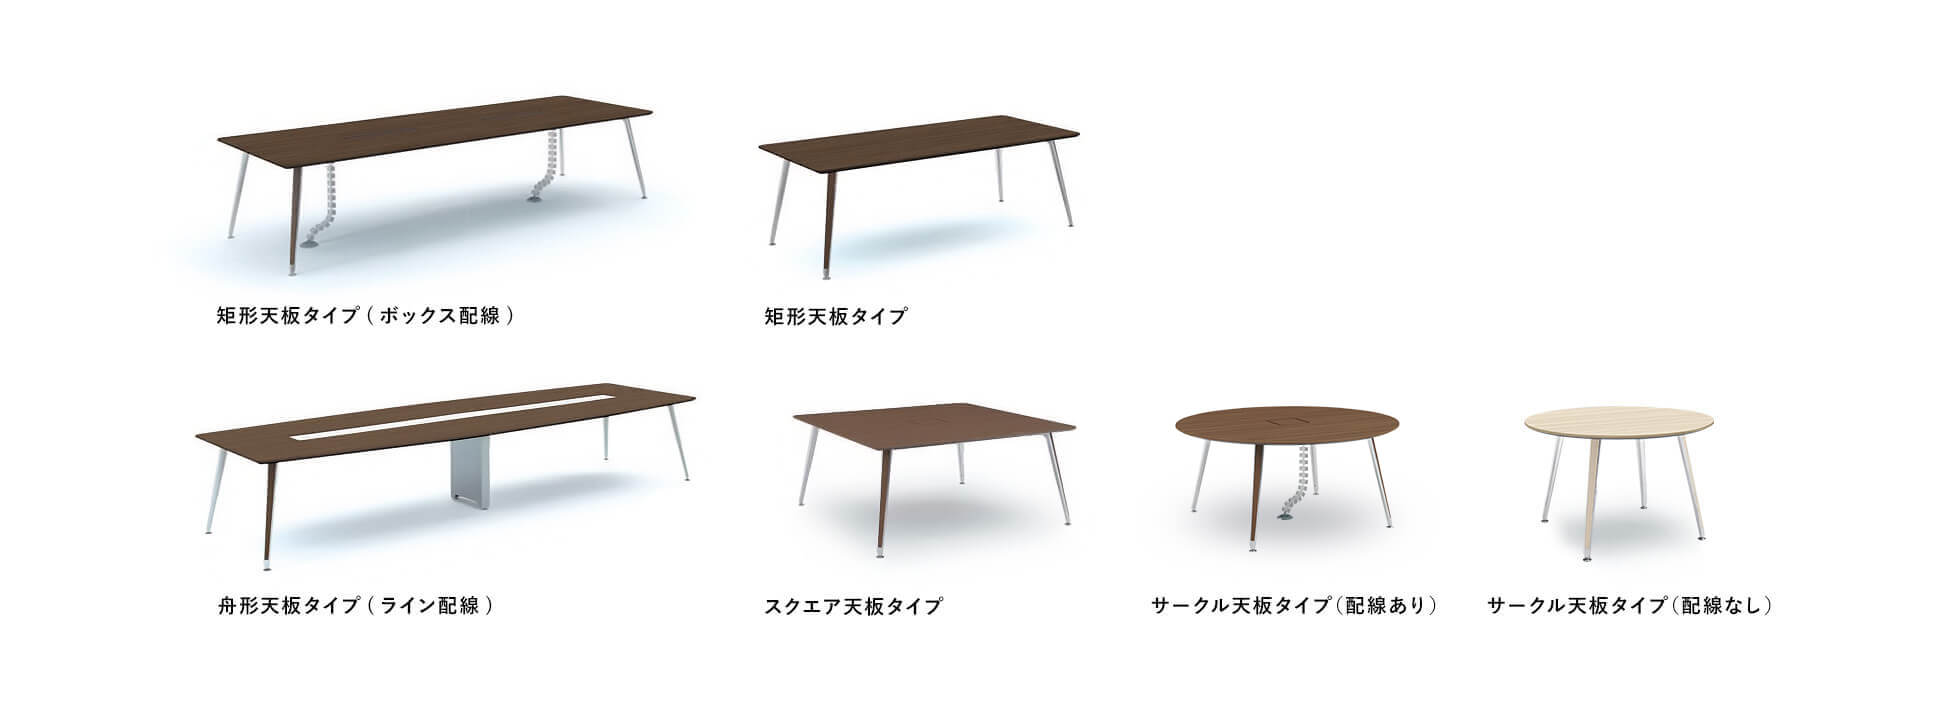 DESK&TABLE | MEETING TABLE